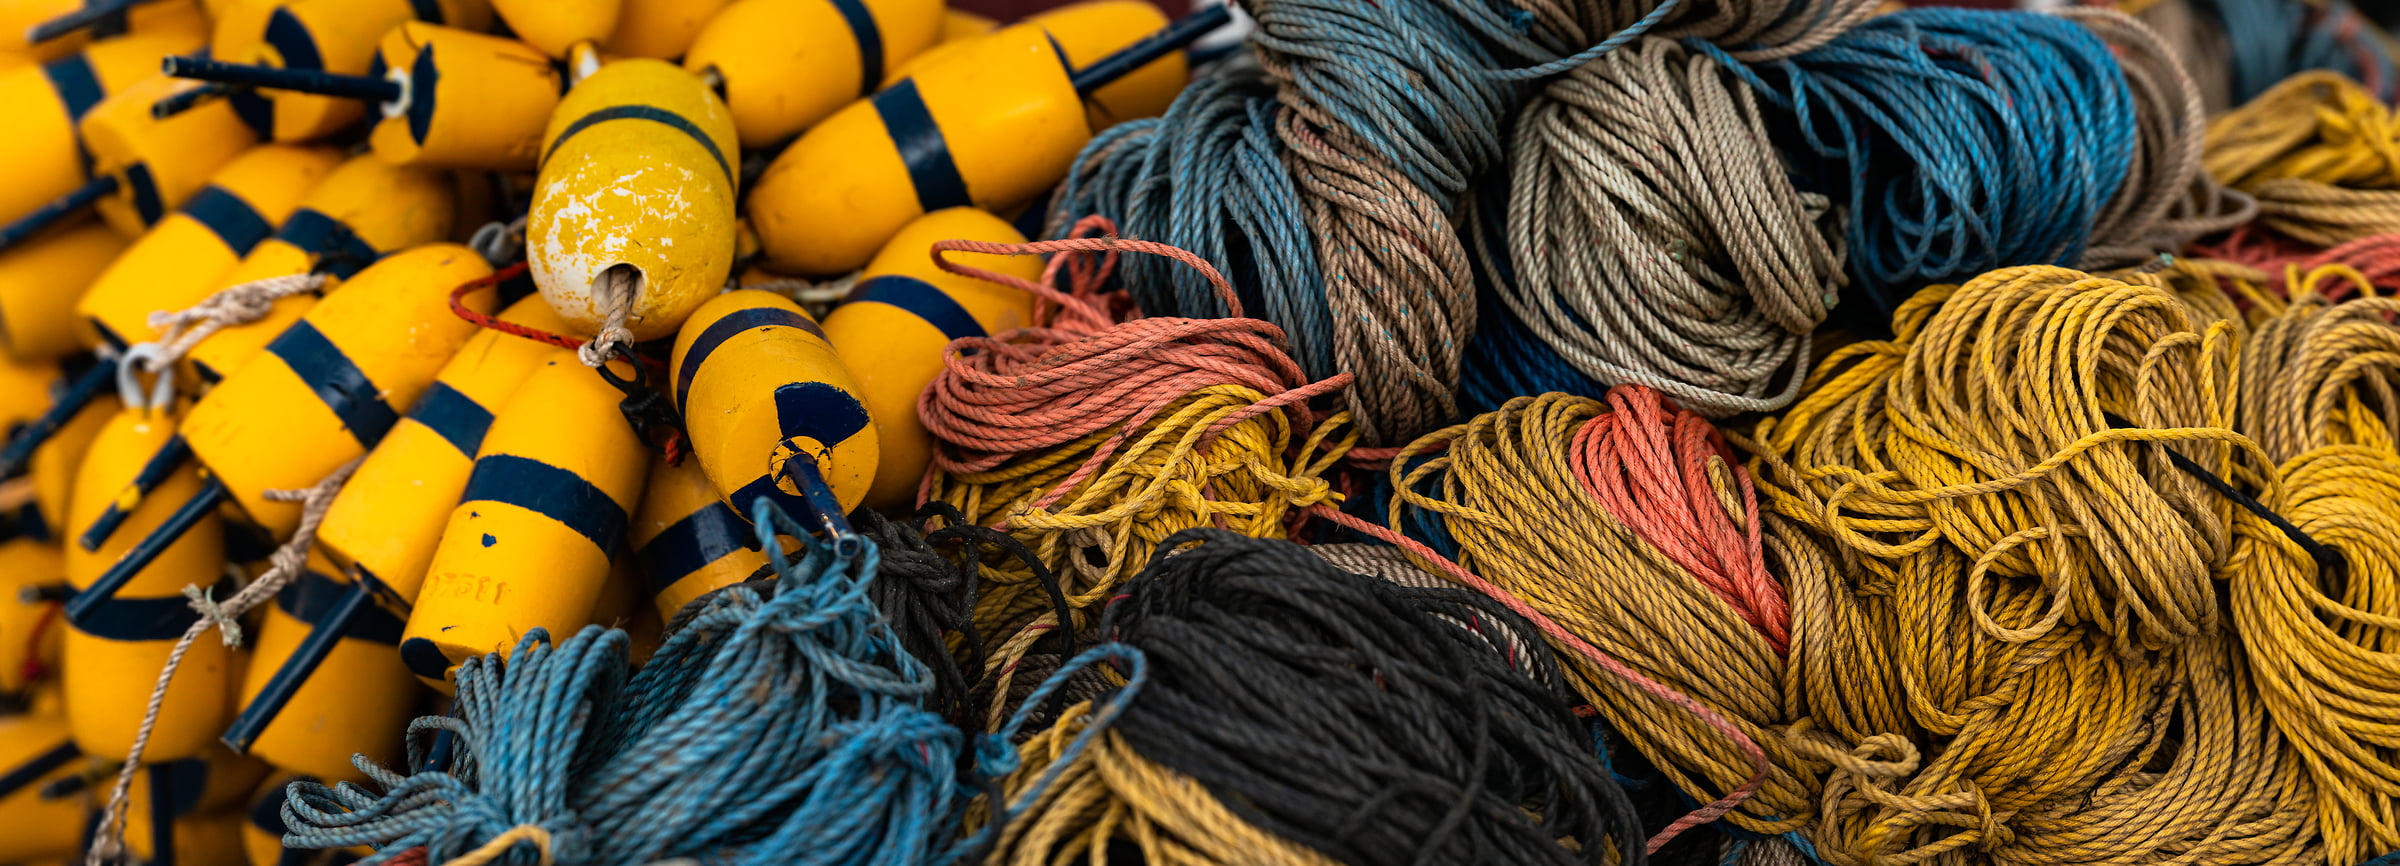 235 megapixels! A very high resolution, large-format VAST photo print of buoys and ropes; fine art photograph created by Aaron Priest in Baldwin Corners, Bernard, Maine.